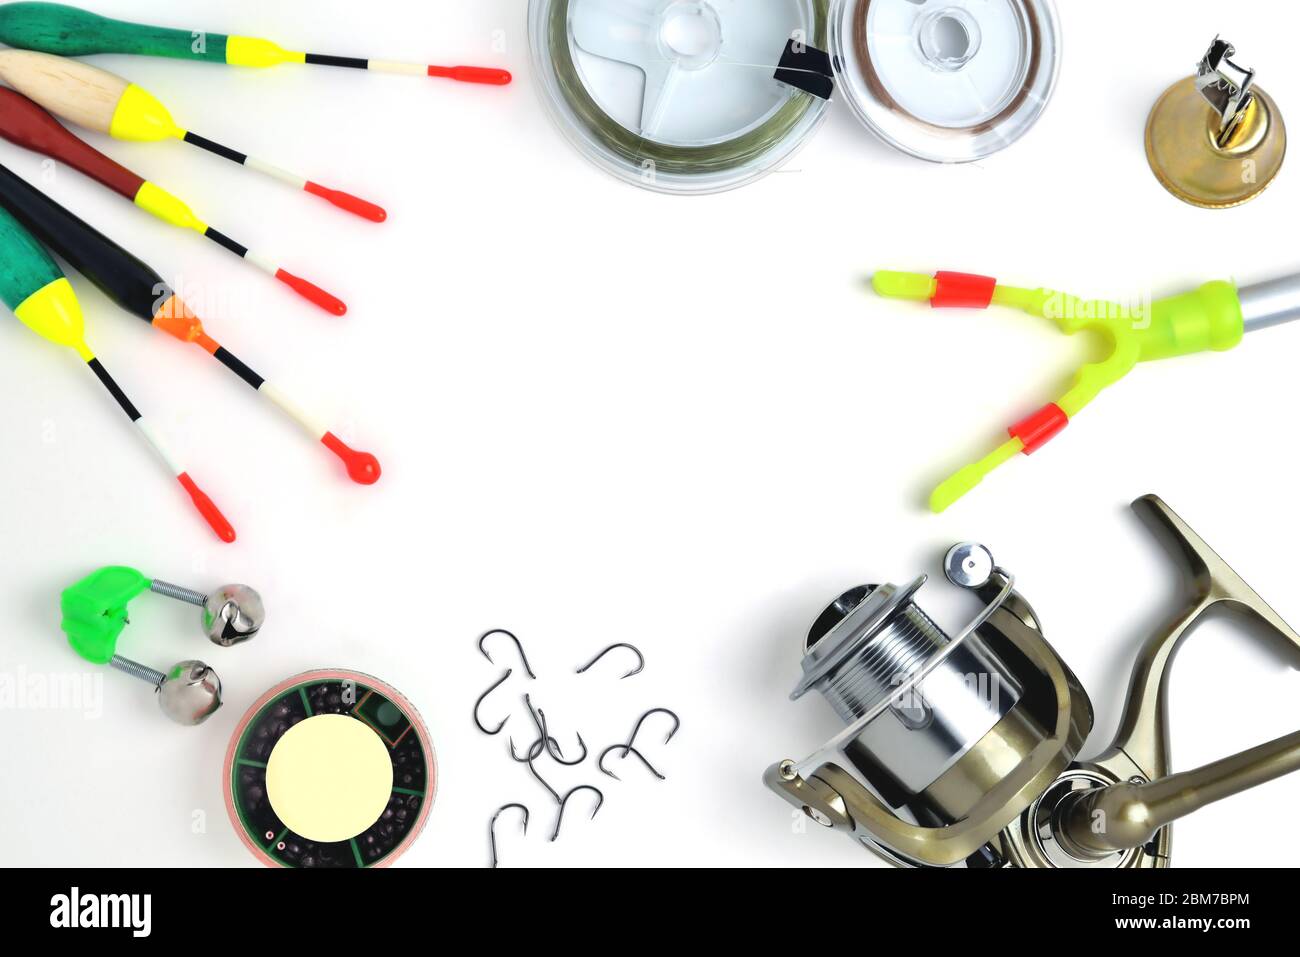 https://c8.alamy.com/comp/2BM7BPM/fishing-accessories-accessory-box-fishing-reel-hooks-fishing-line-floats-on-a-white-background-a-place-for-copy-space-2BM7BPM.jpg